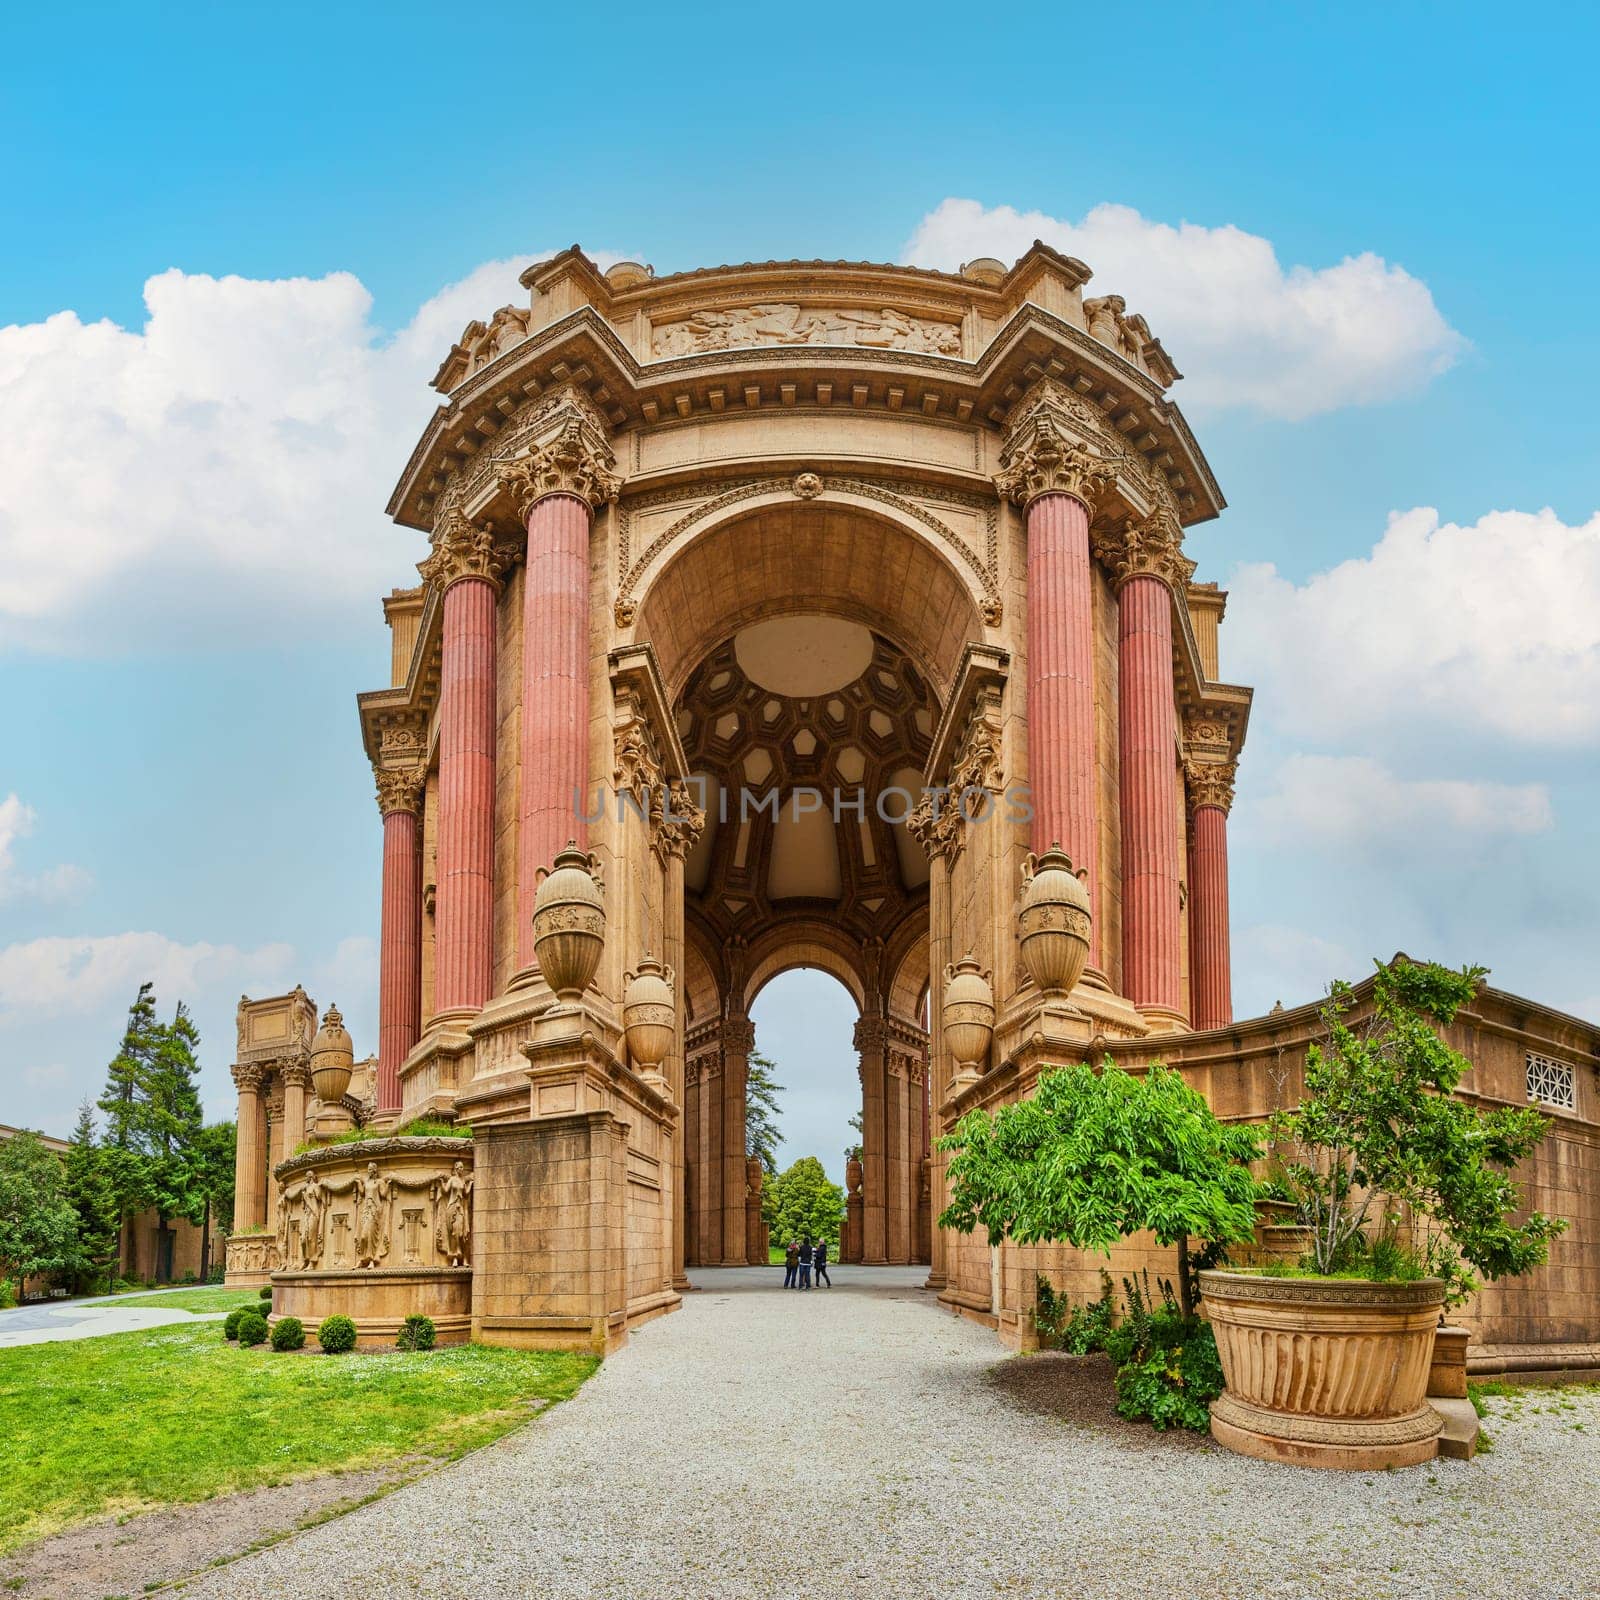 Image of Panorama Palace of Fine Arts with people standing under center of dome structure on blue sky day